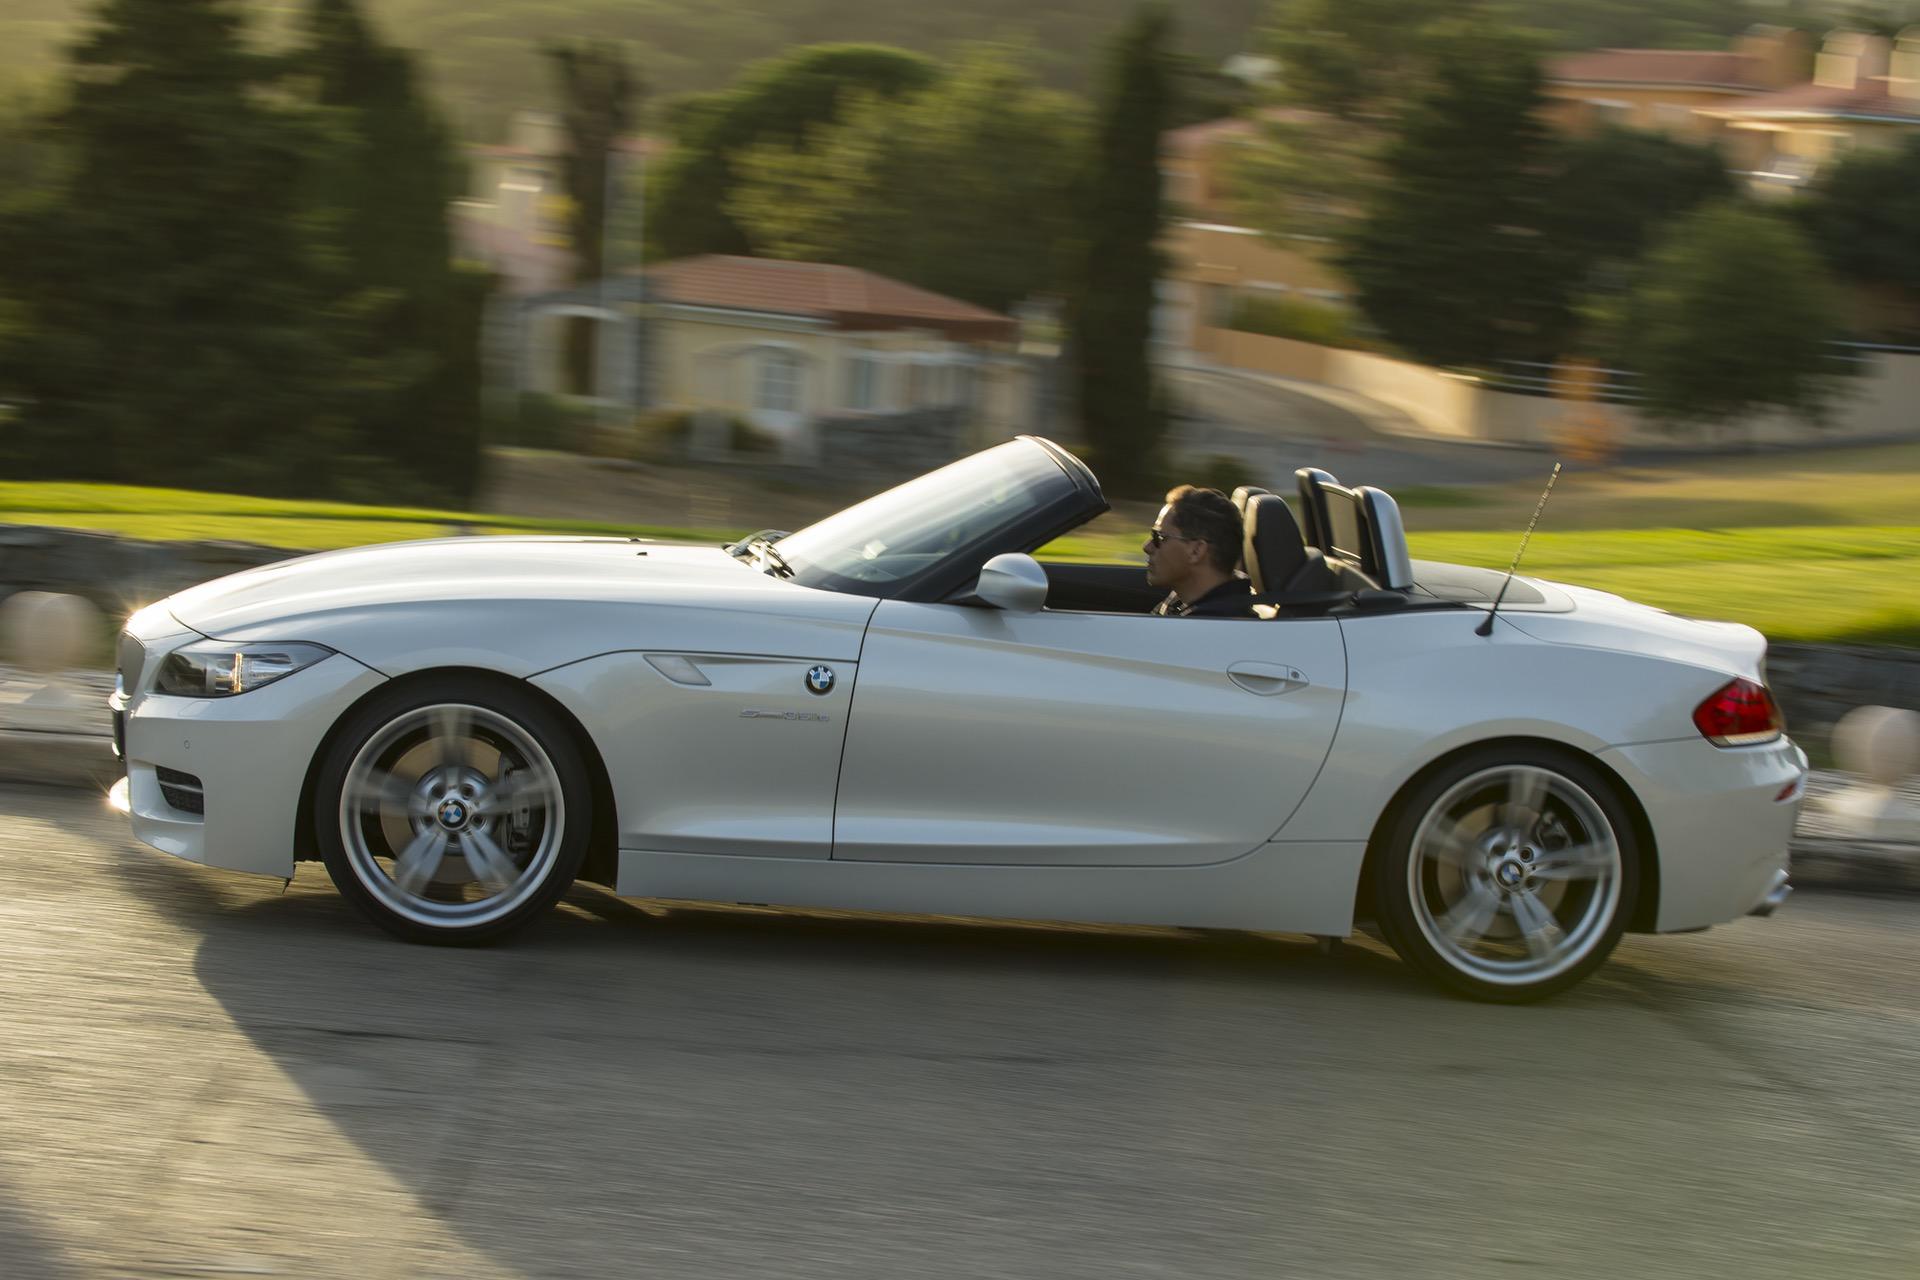 BMW E89 Z4 Roadster images 10